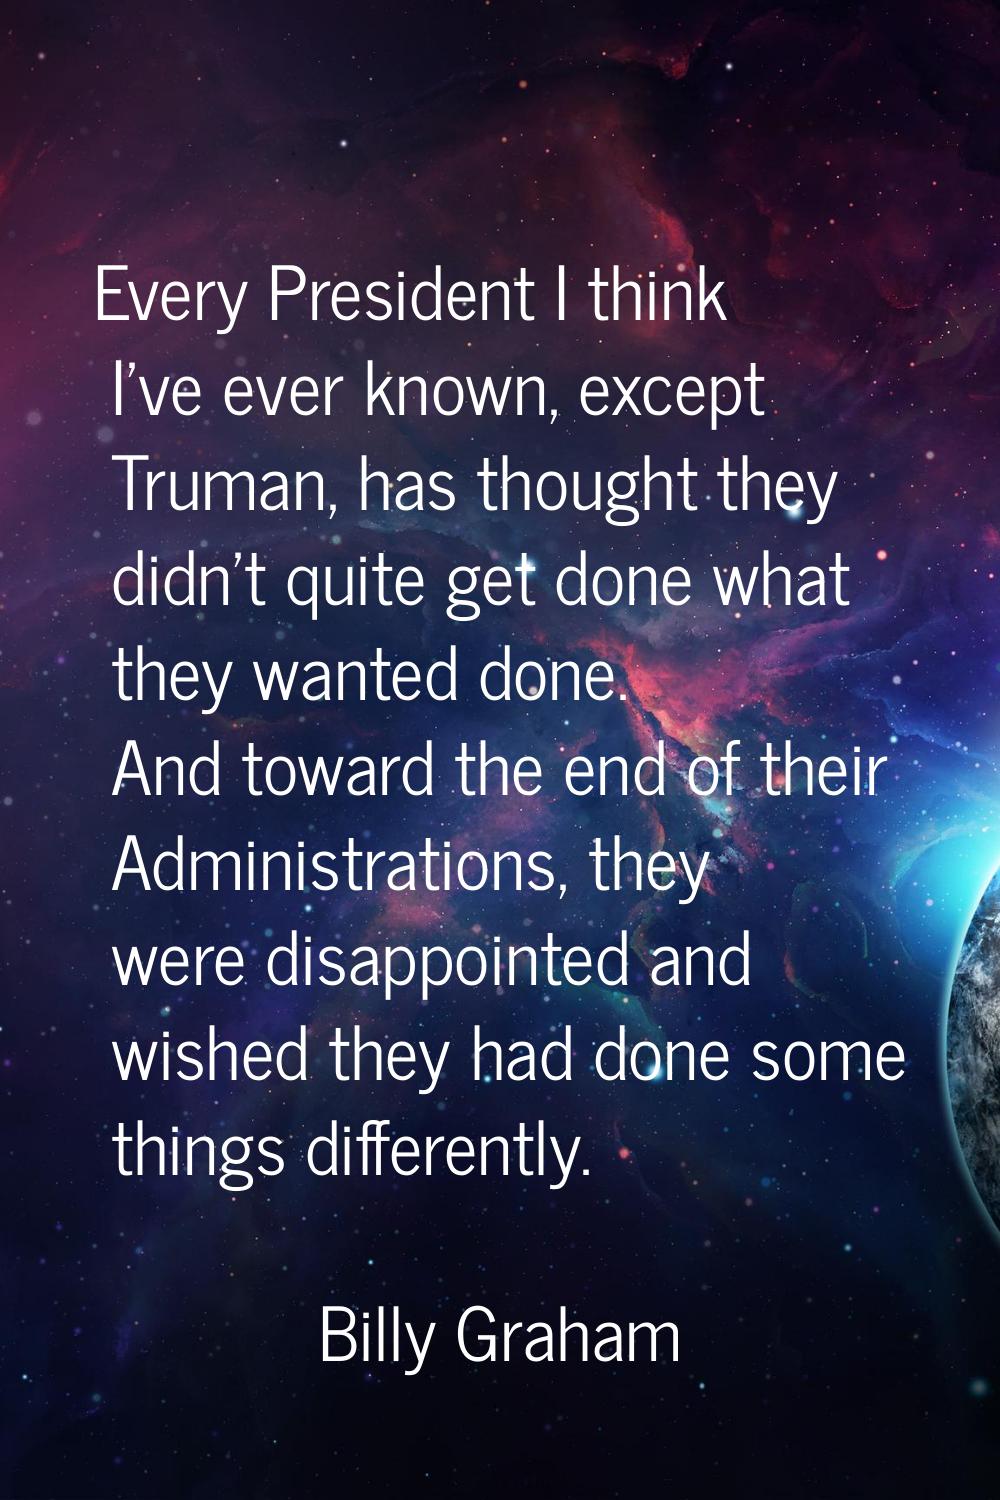 Every President I think I've ever known, except Truman, has thought they didn't quite get done what